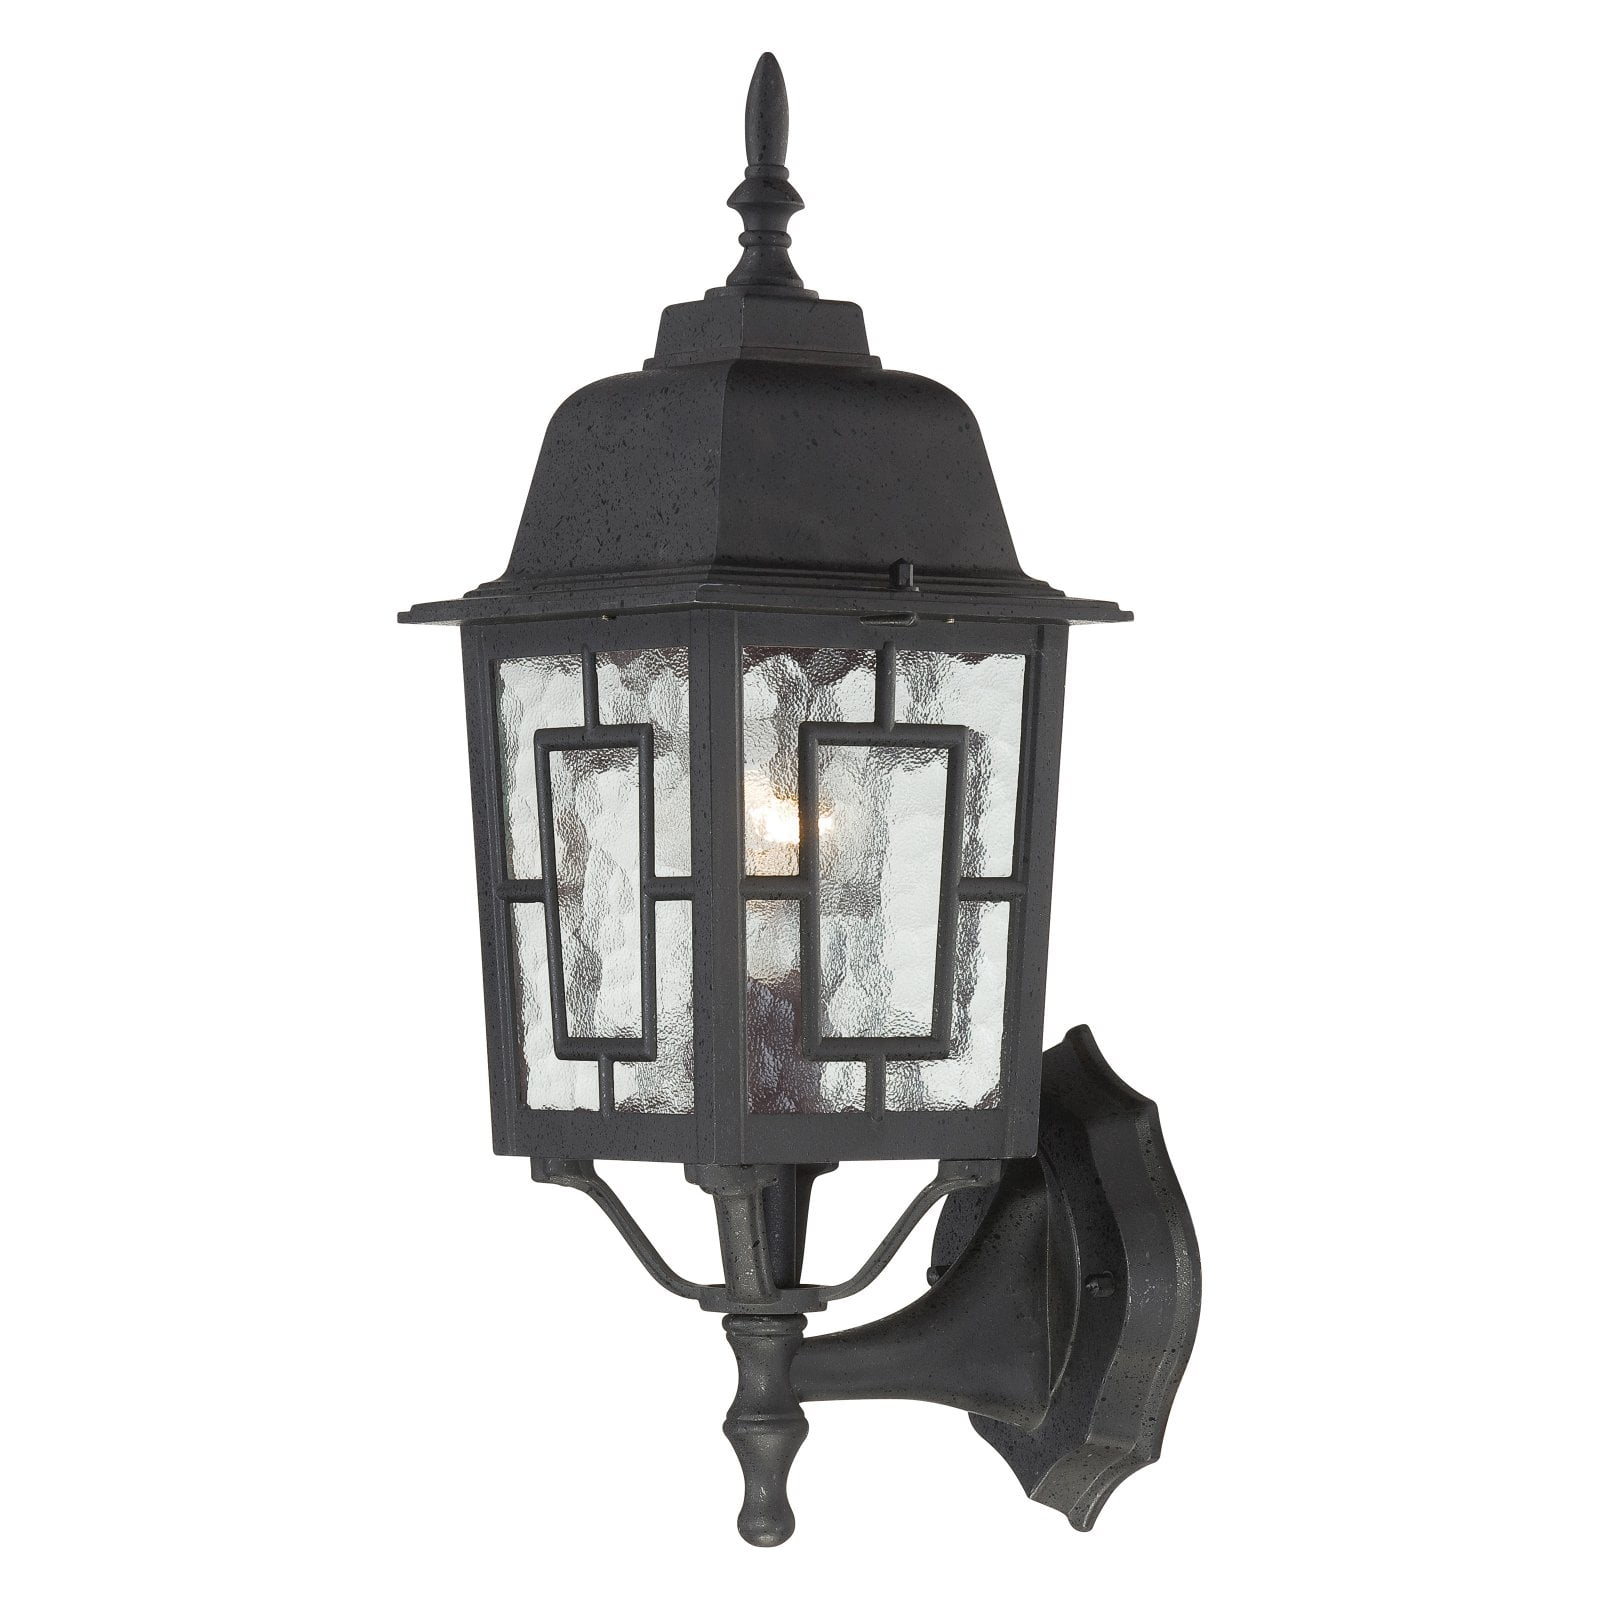 Nuvo Banyan 17 in. Outdoor Wall Light